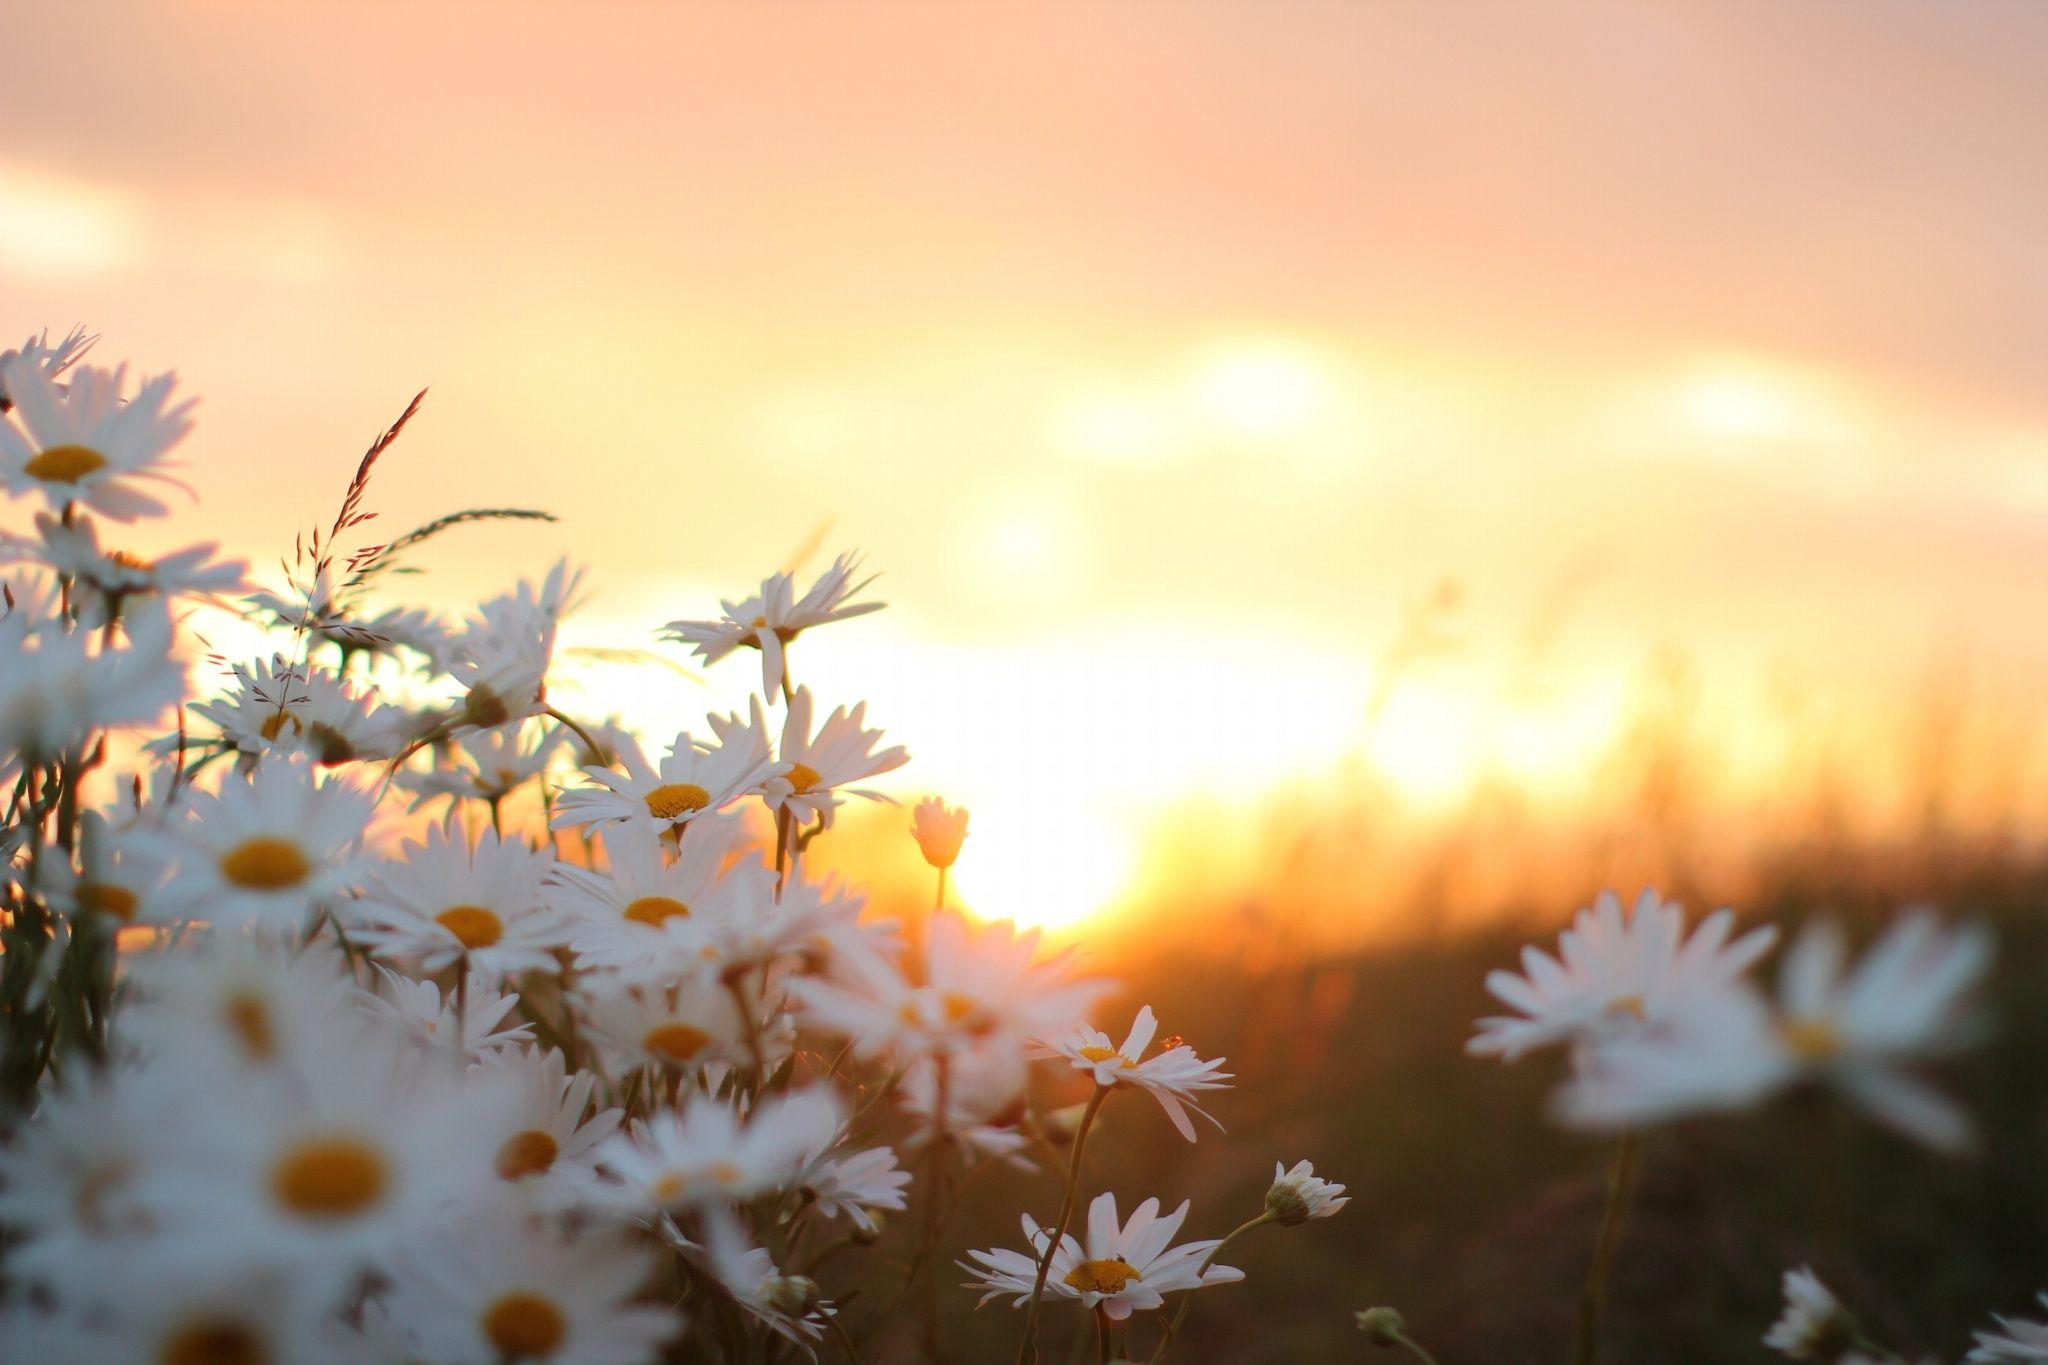 Gallery by tag: daisies wallpaper